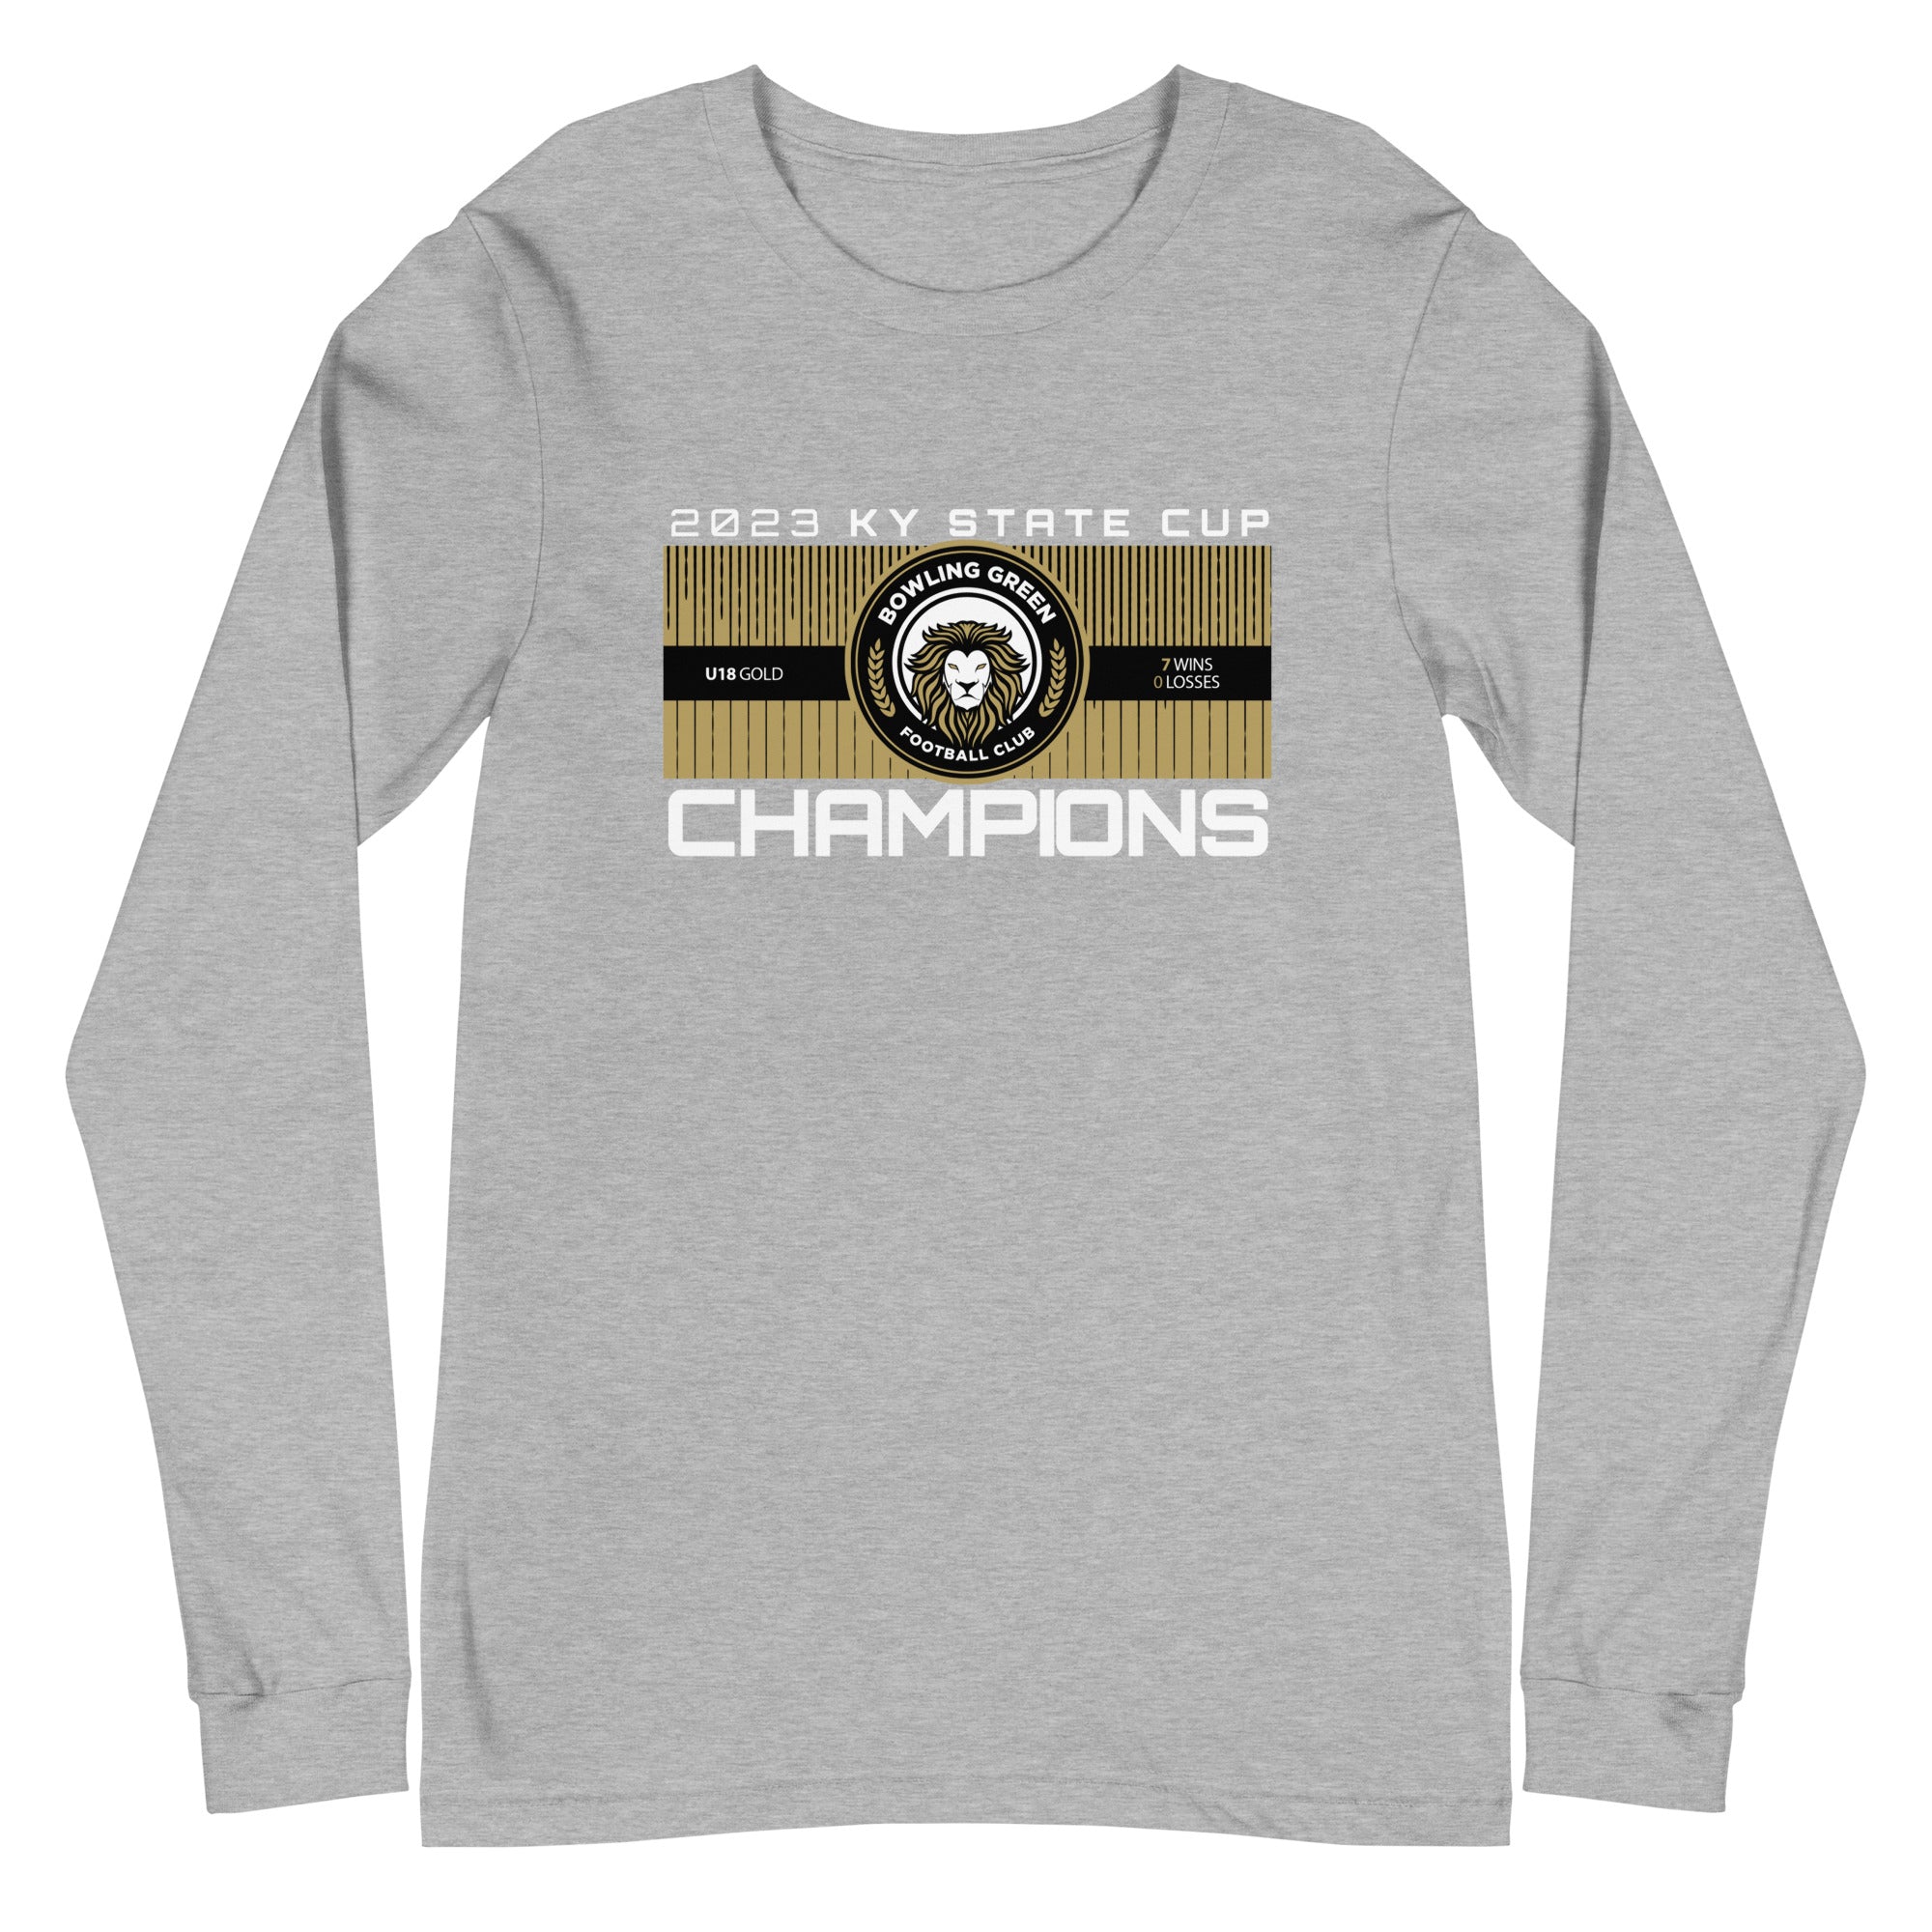 2023 KY State Cup Champion Long-Sleeve Tee